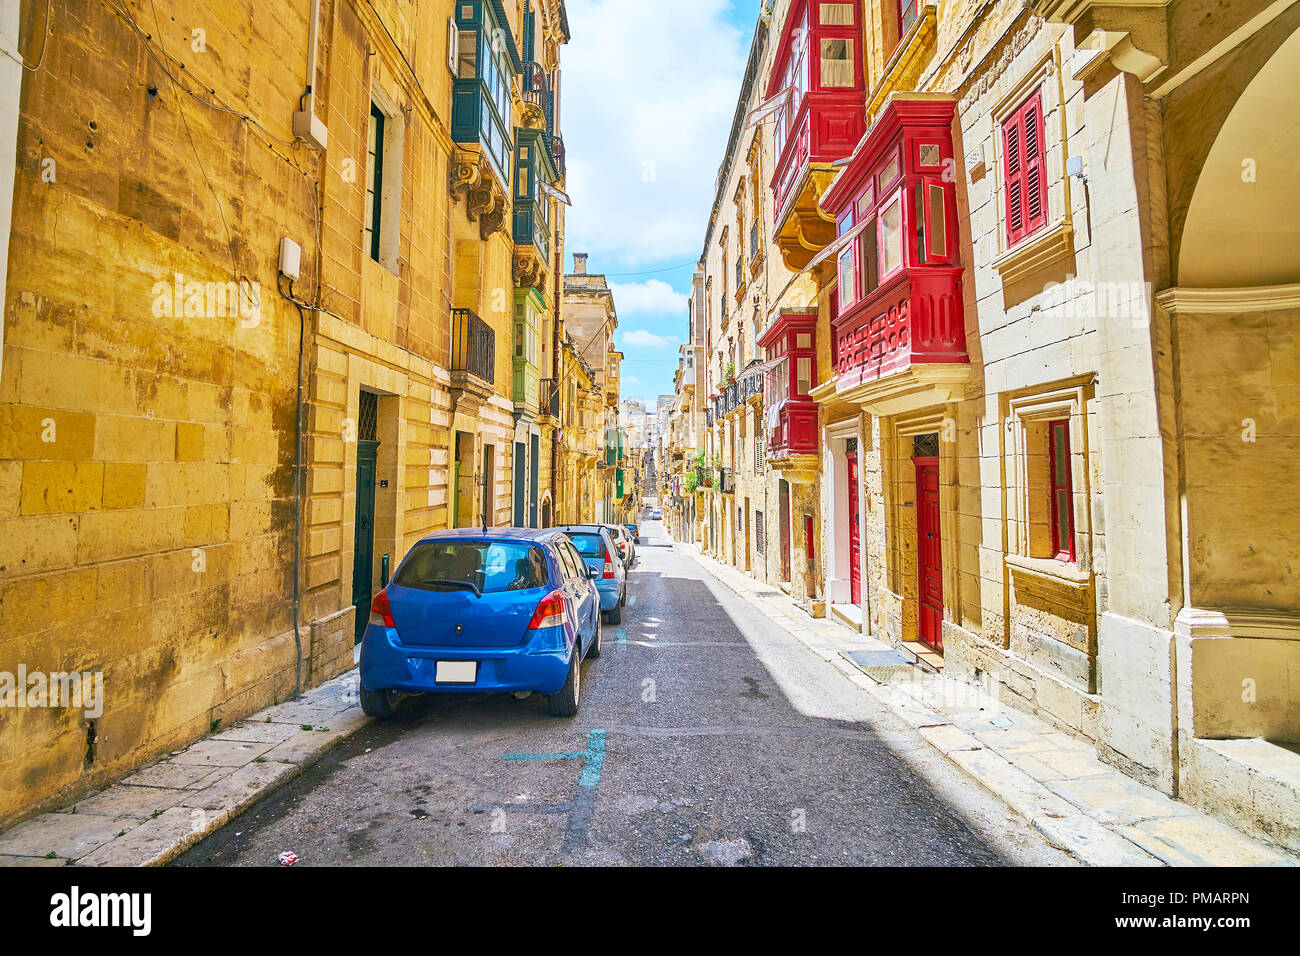 The colored wooden doors, window frames and balconies are traditional decorative elements of Maltese architecture, Valletta. Stock Photo